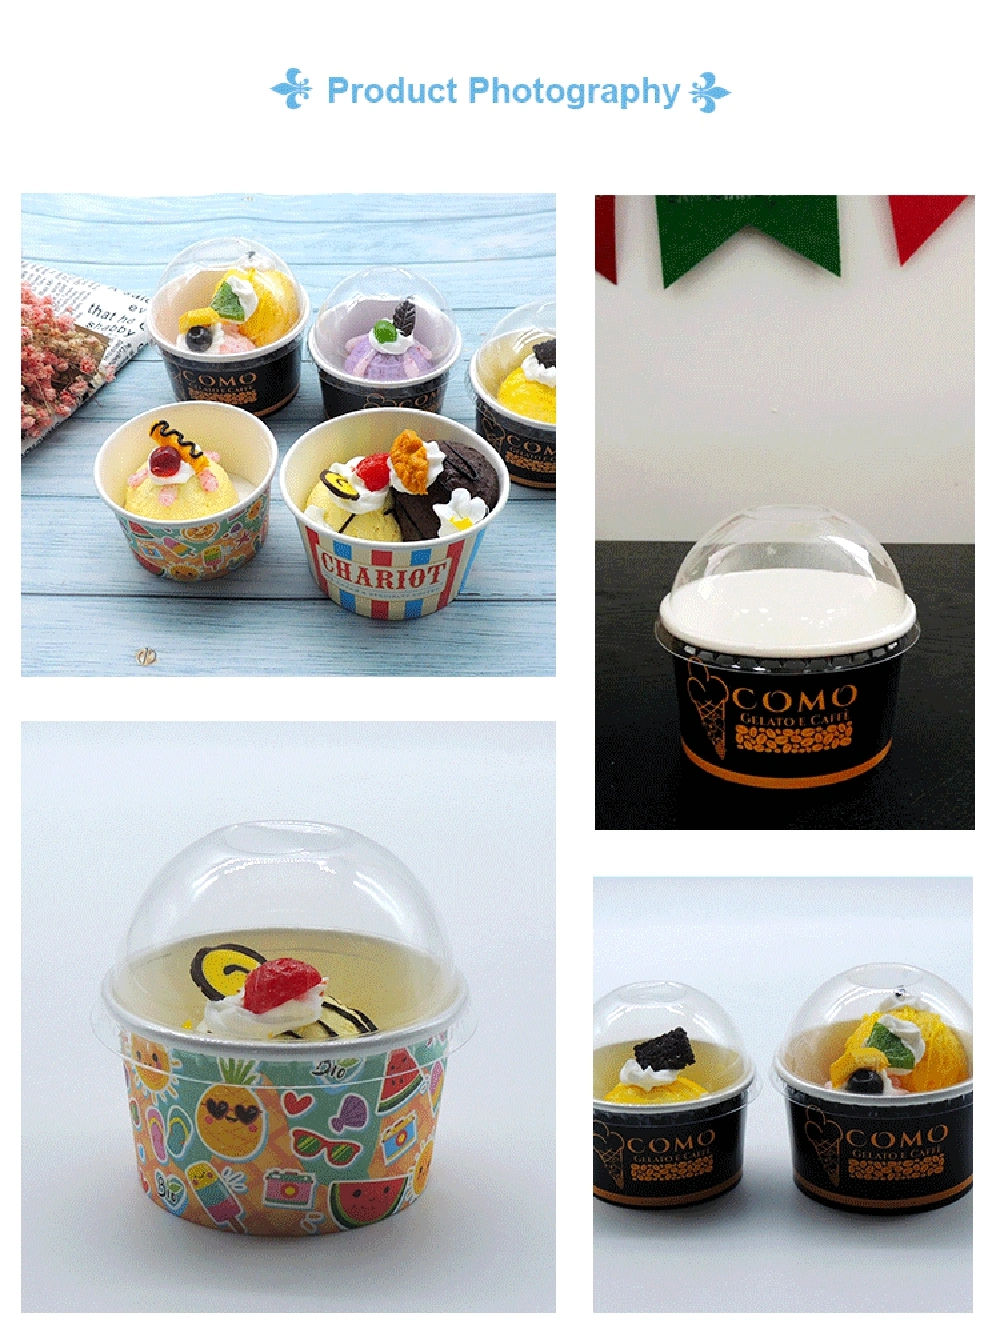 Paper Cup for Ice Cream Custom Recycle Ice Cream Paper Cups for Children